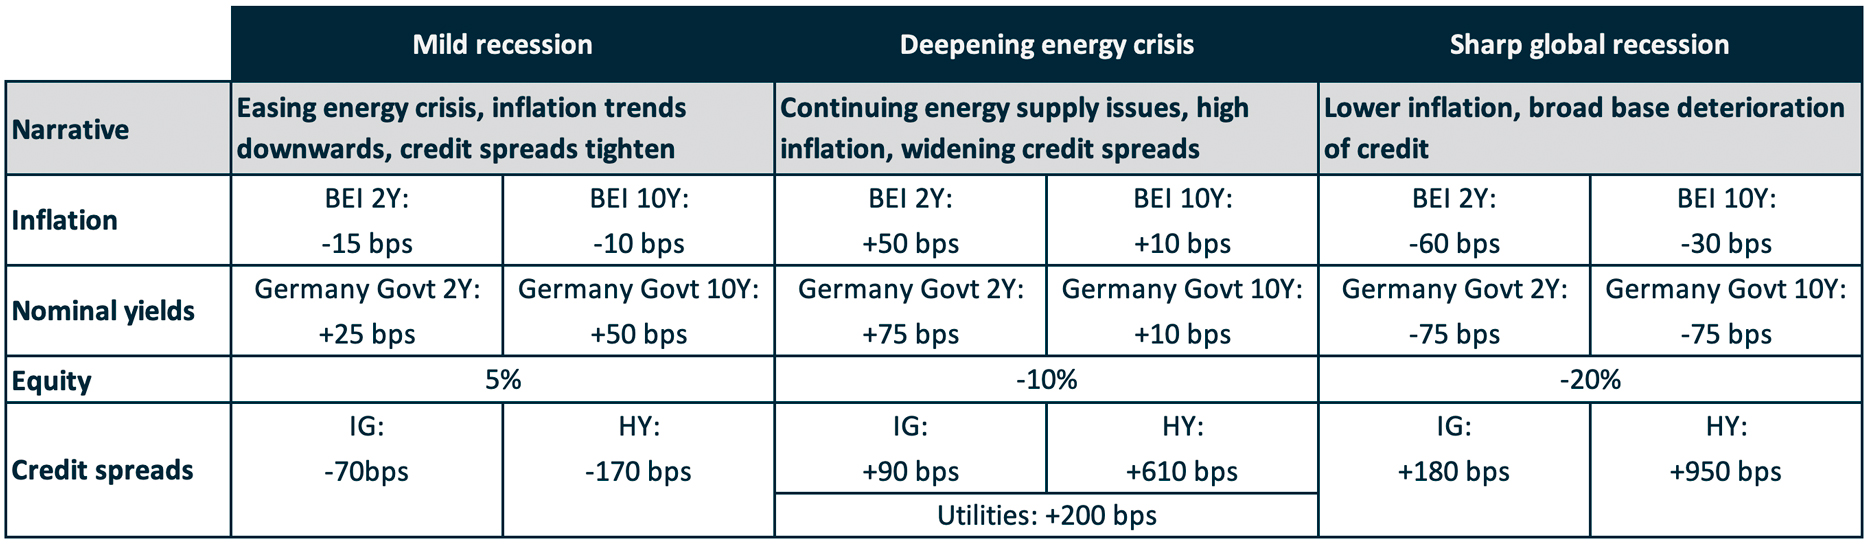 This shows the assumptions for our three scenarios, mild recession, deepening energy crisis and sharp global recession.